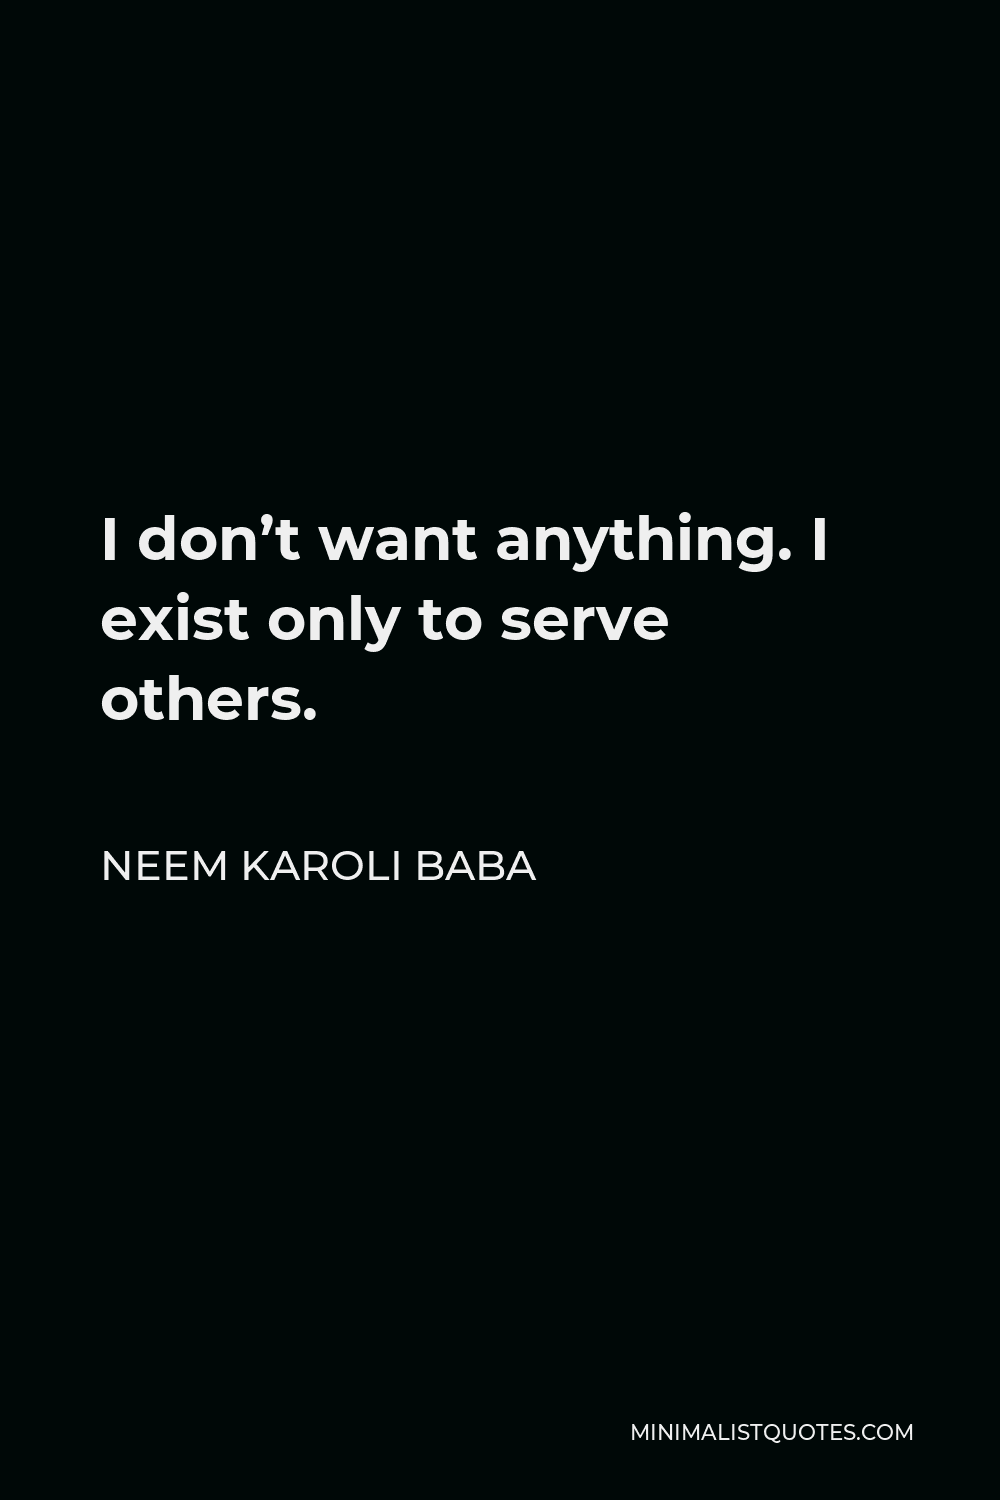 Neem Karoli Baba Quote - I don’t want anything. I exist only to serve others.